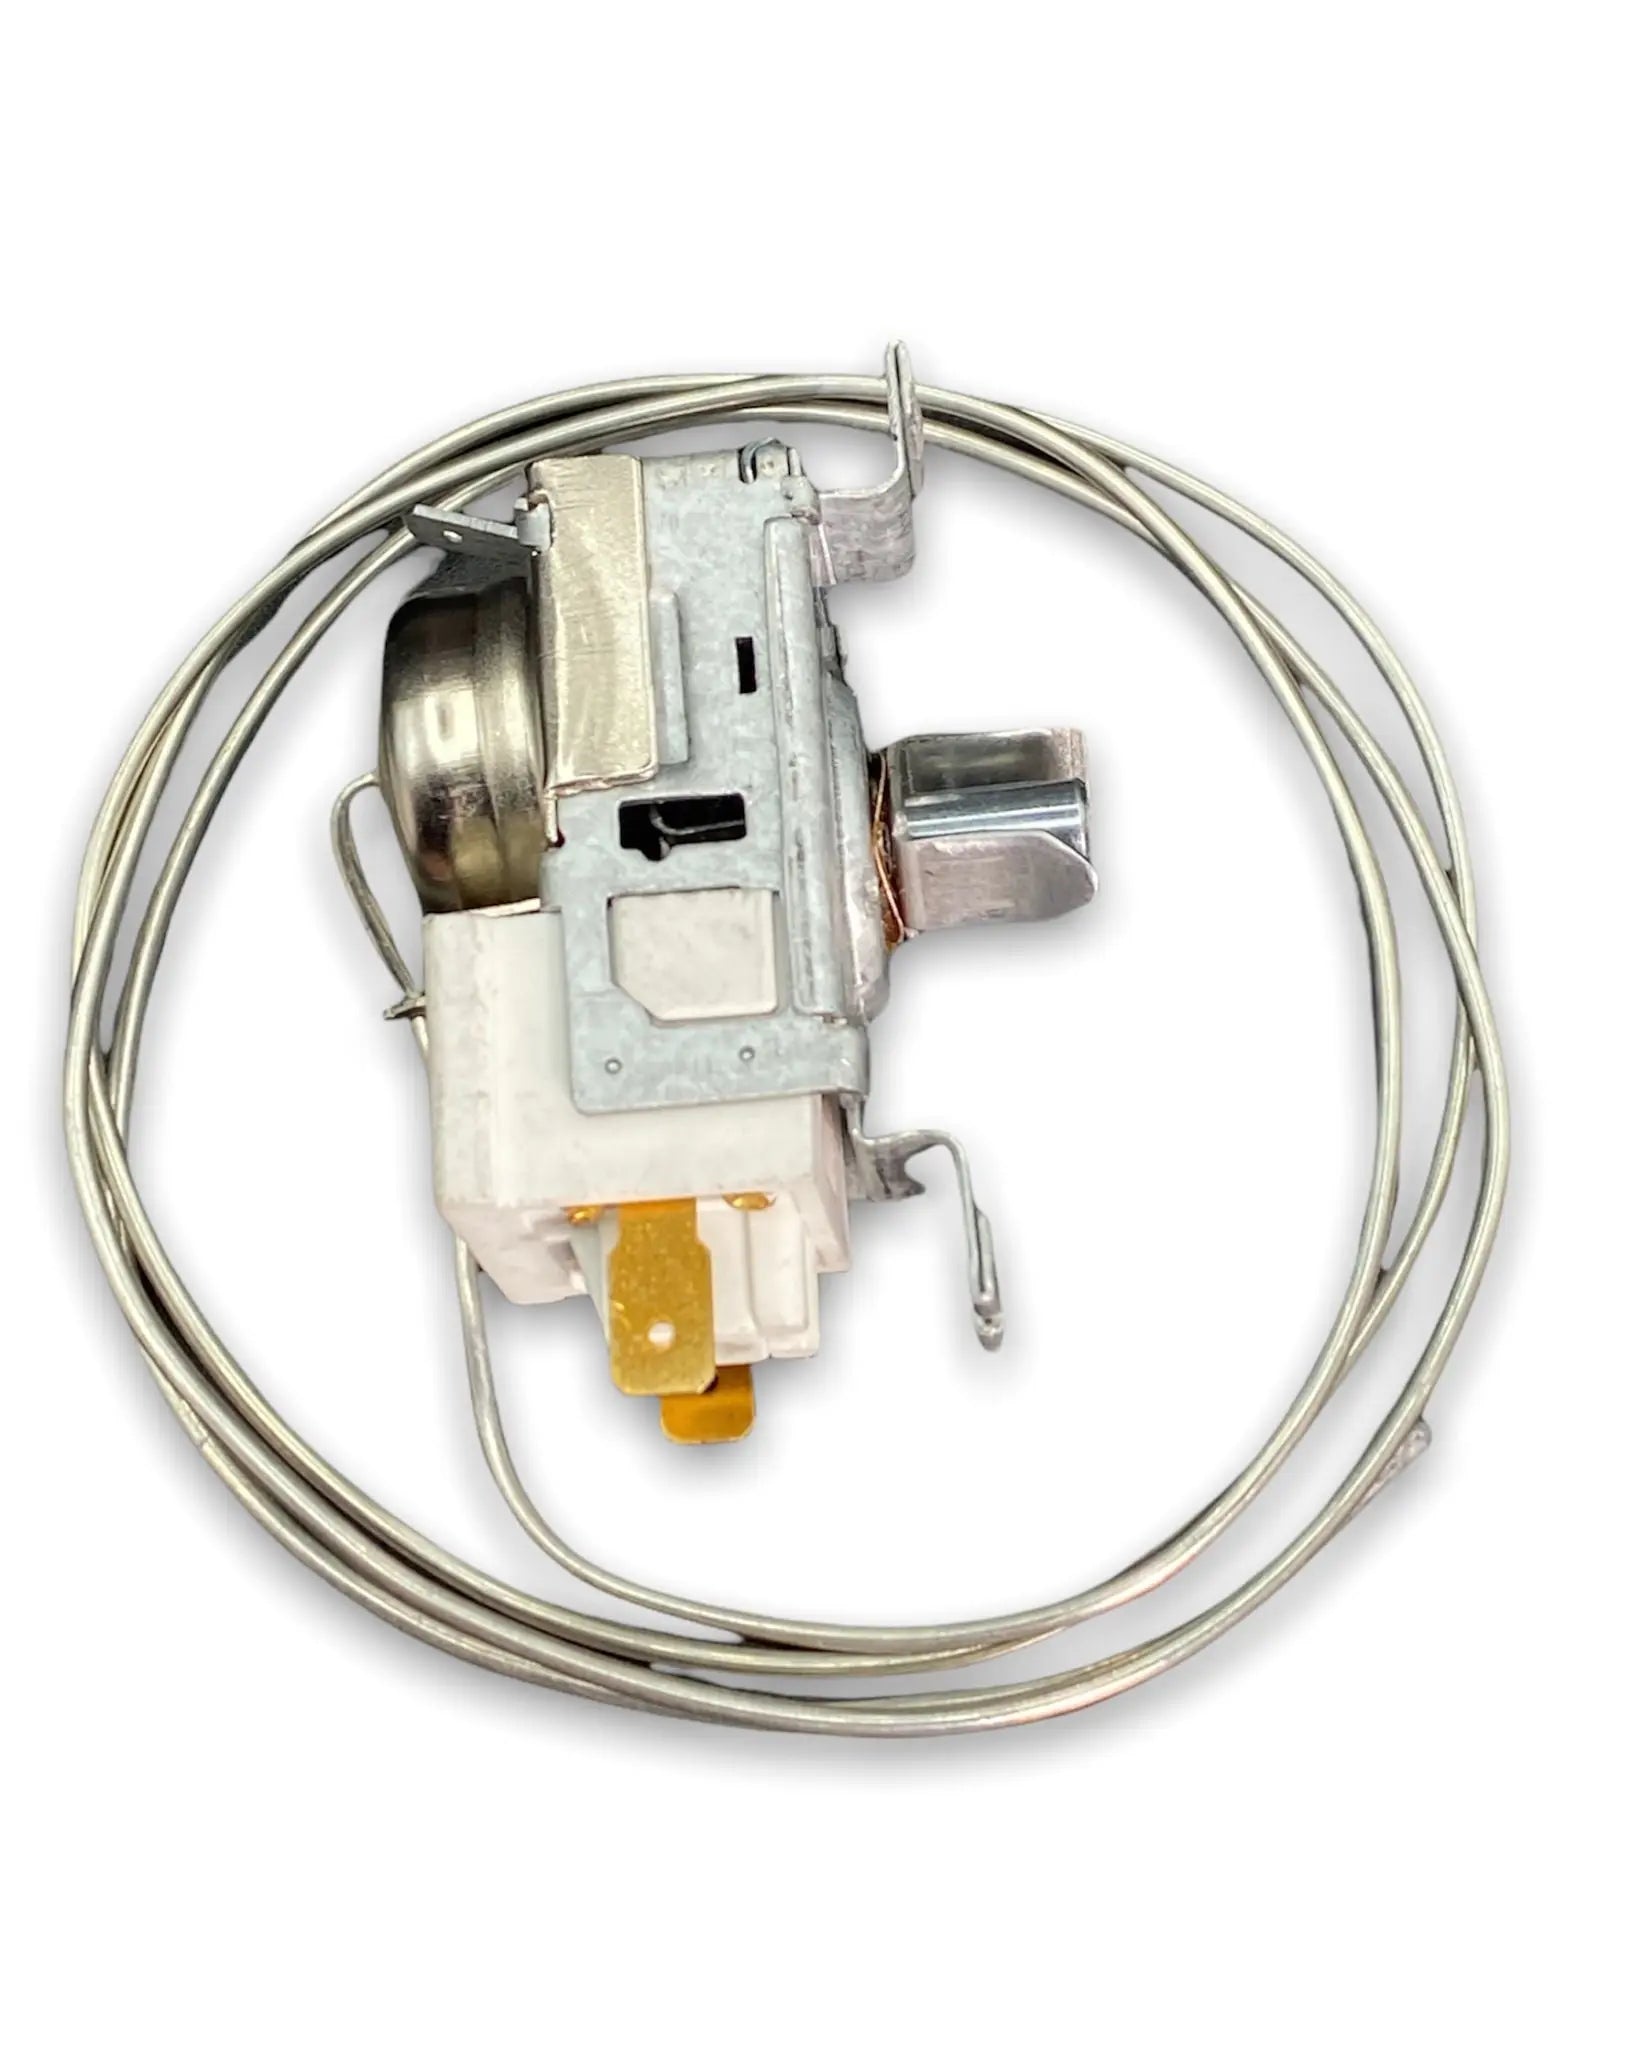 Electrolux Refrigerator Temperature Control (Thermostat) - 241537103,  REPLACES: 241537101 5304421256 5304445058 5304458021 G450226-08 3016212  45022608 